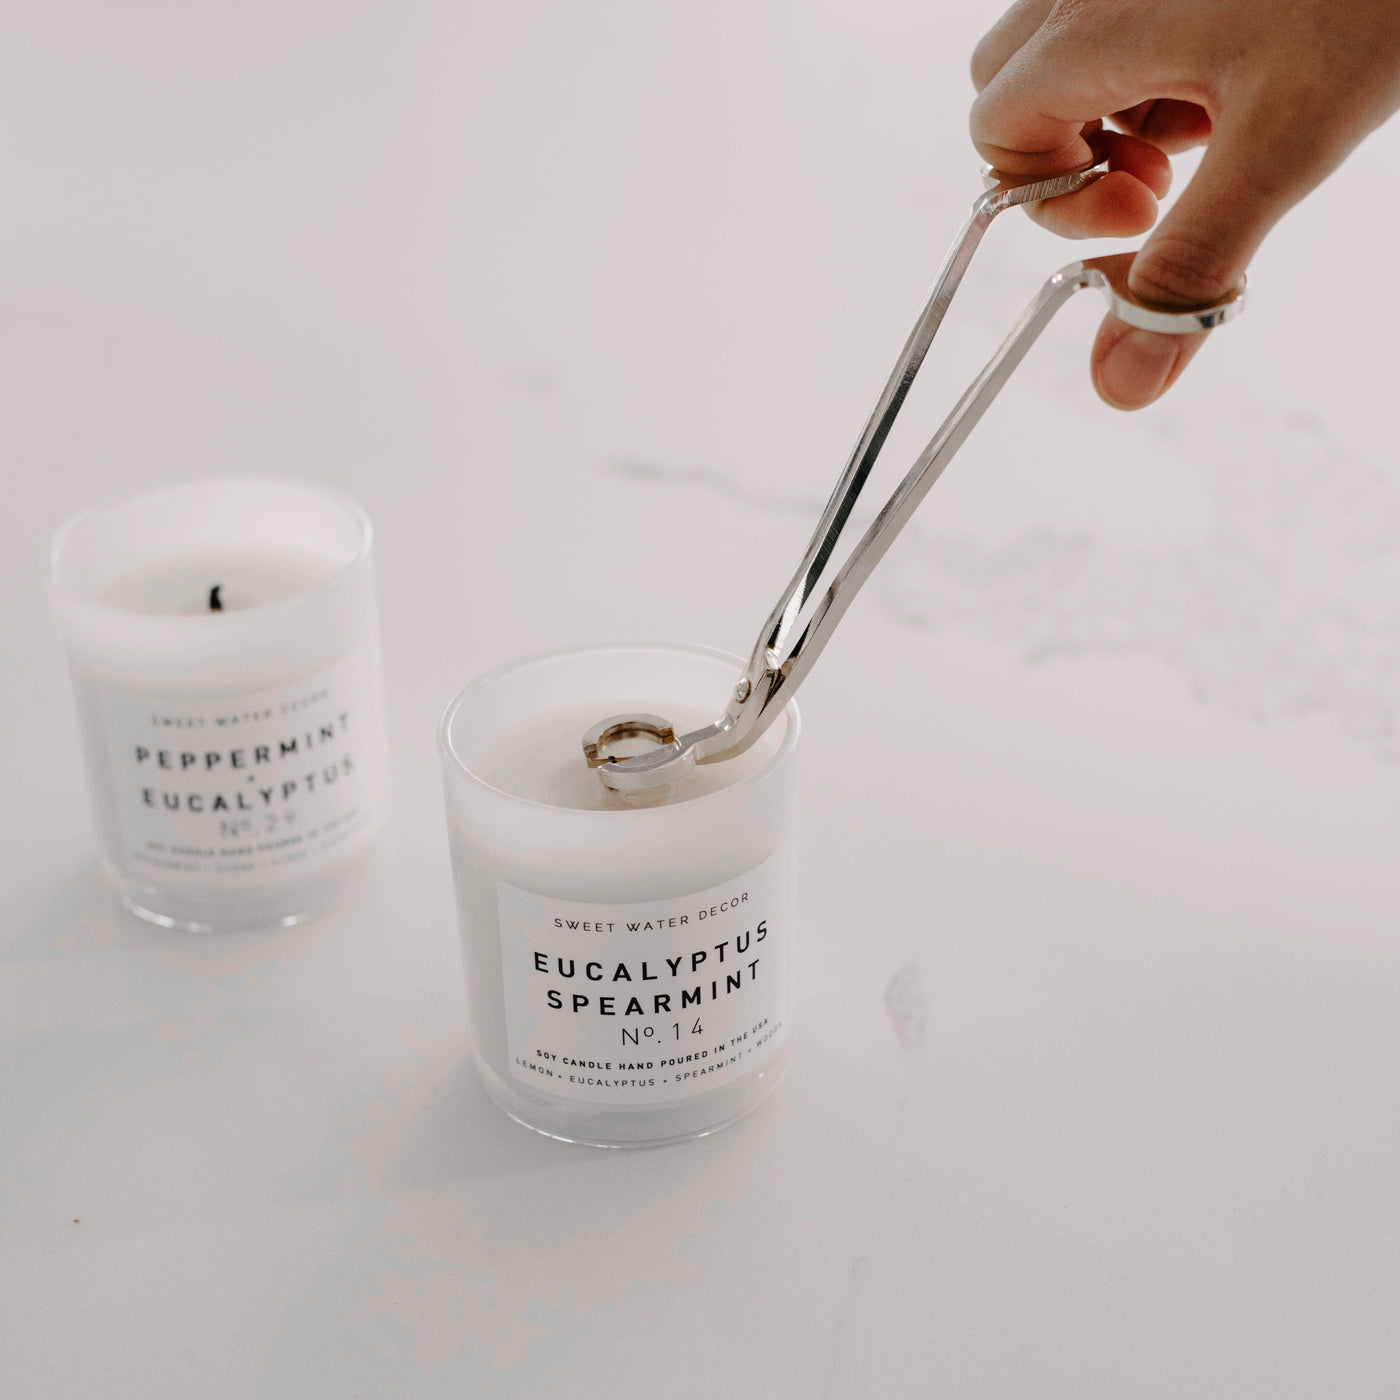 Silver Candle Care Kit